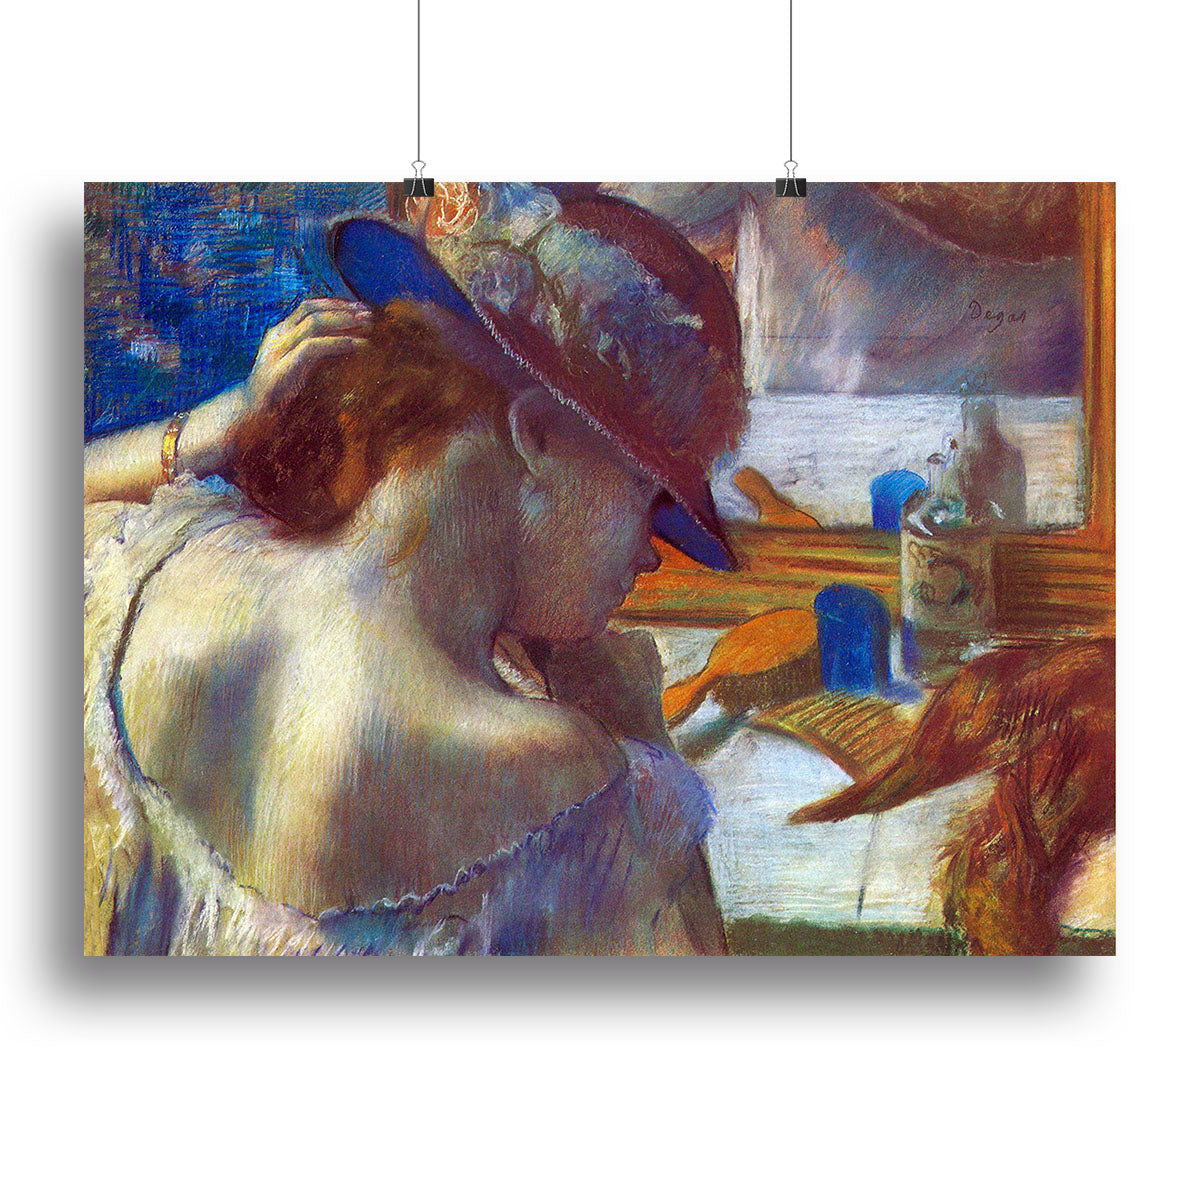 Before the mirror by Degas Canvas Print or Poster - Canvas Art Rocks - 2